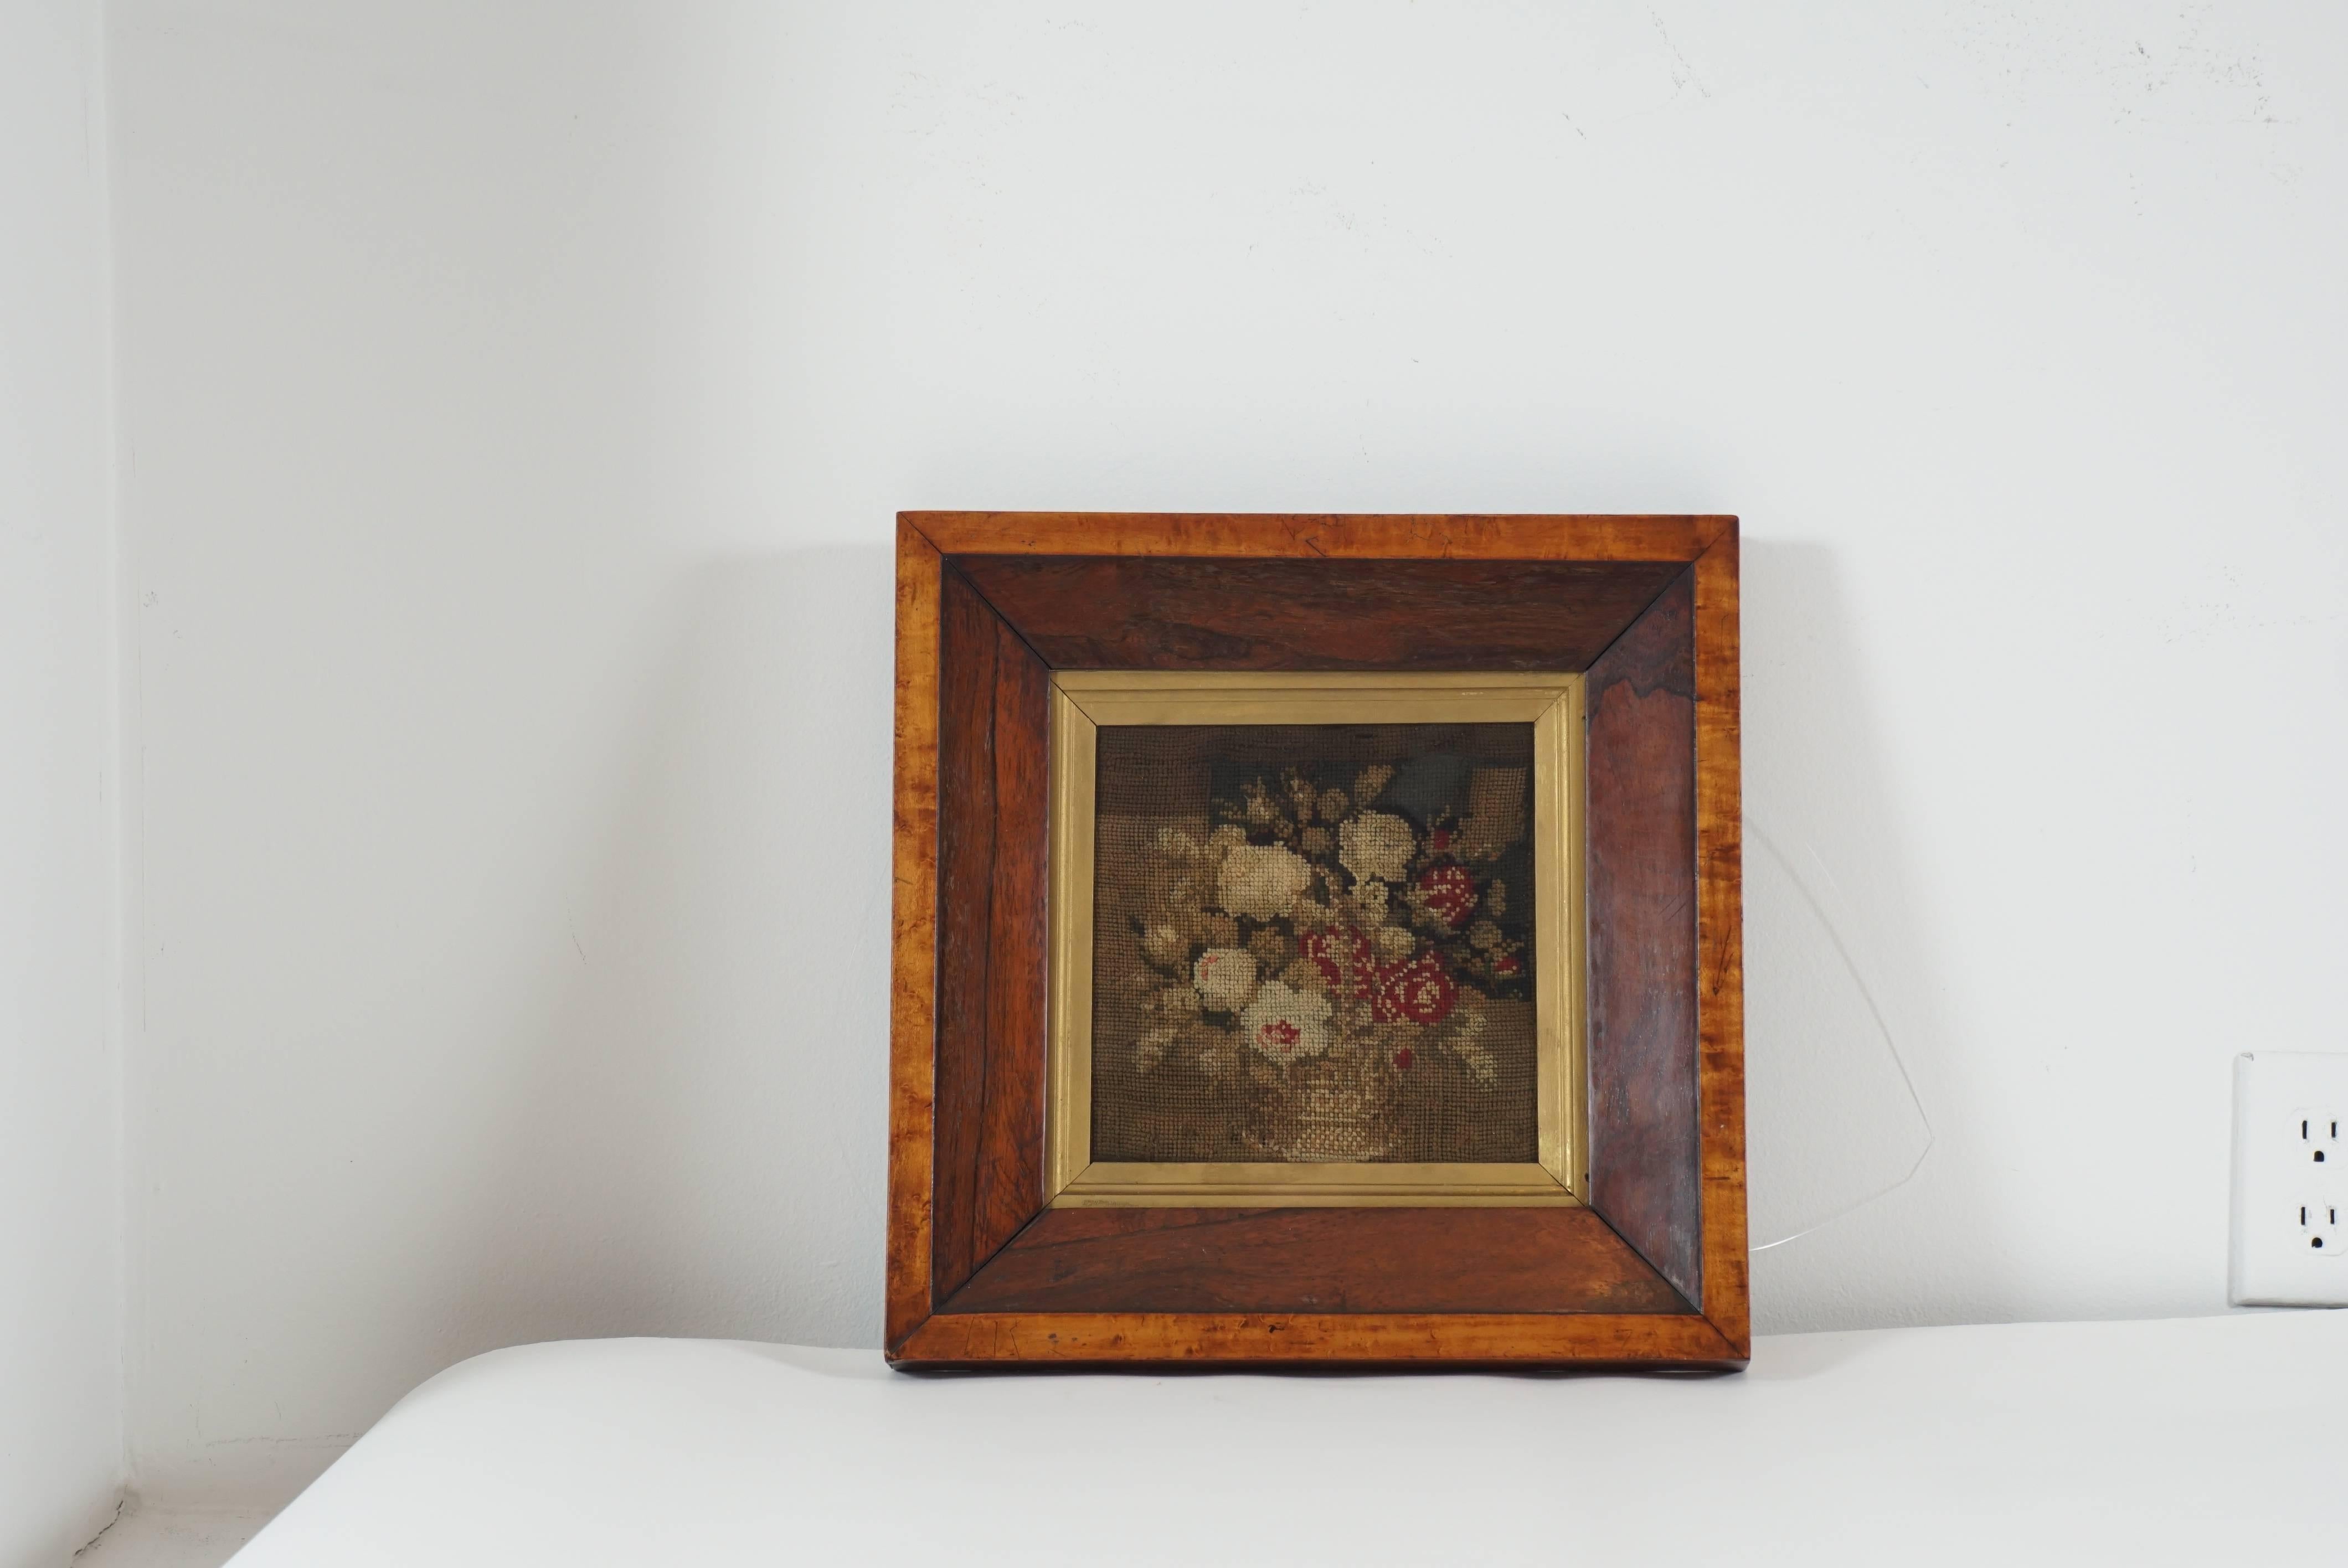 Fabulously framed 19th century needlepoint in original frame. The piece is backed with worn newspaper that is dated 1879. A beautiful addition to a traditional setting.